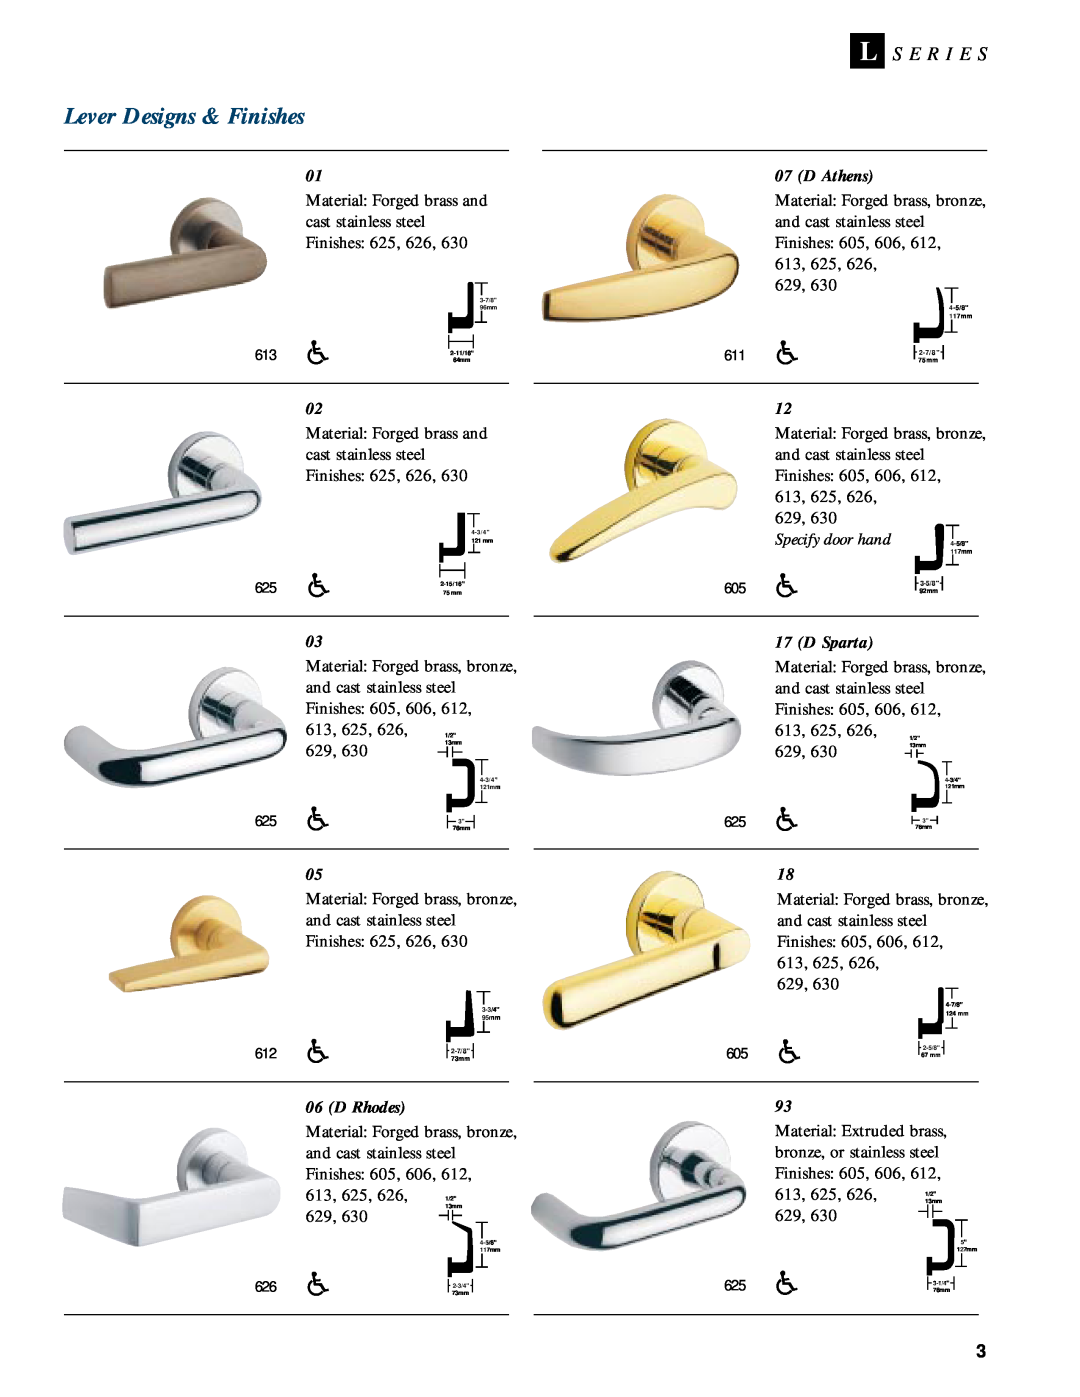 Schlage L-SERIES manual Lever Designs & Finishes, L S E R I E S, D Athens, Specify door hand, D Sparta, D Rhodes 